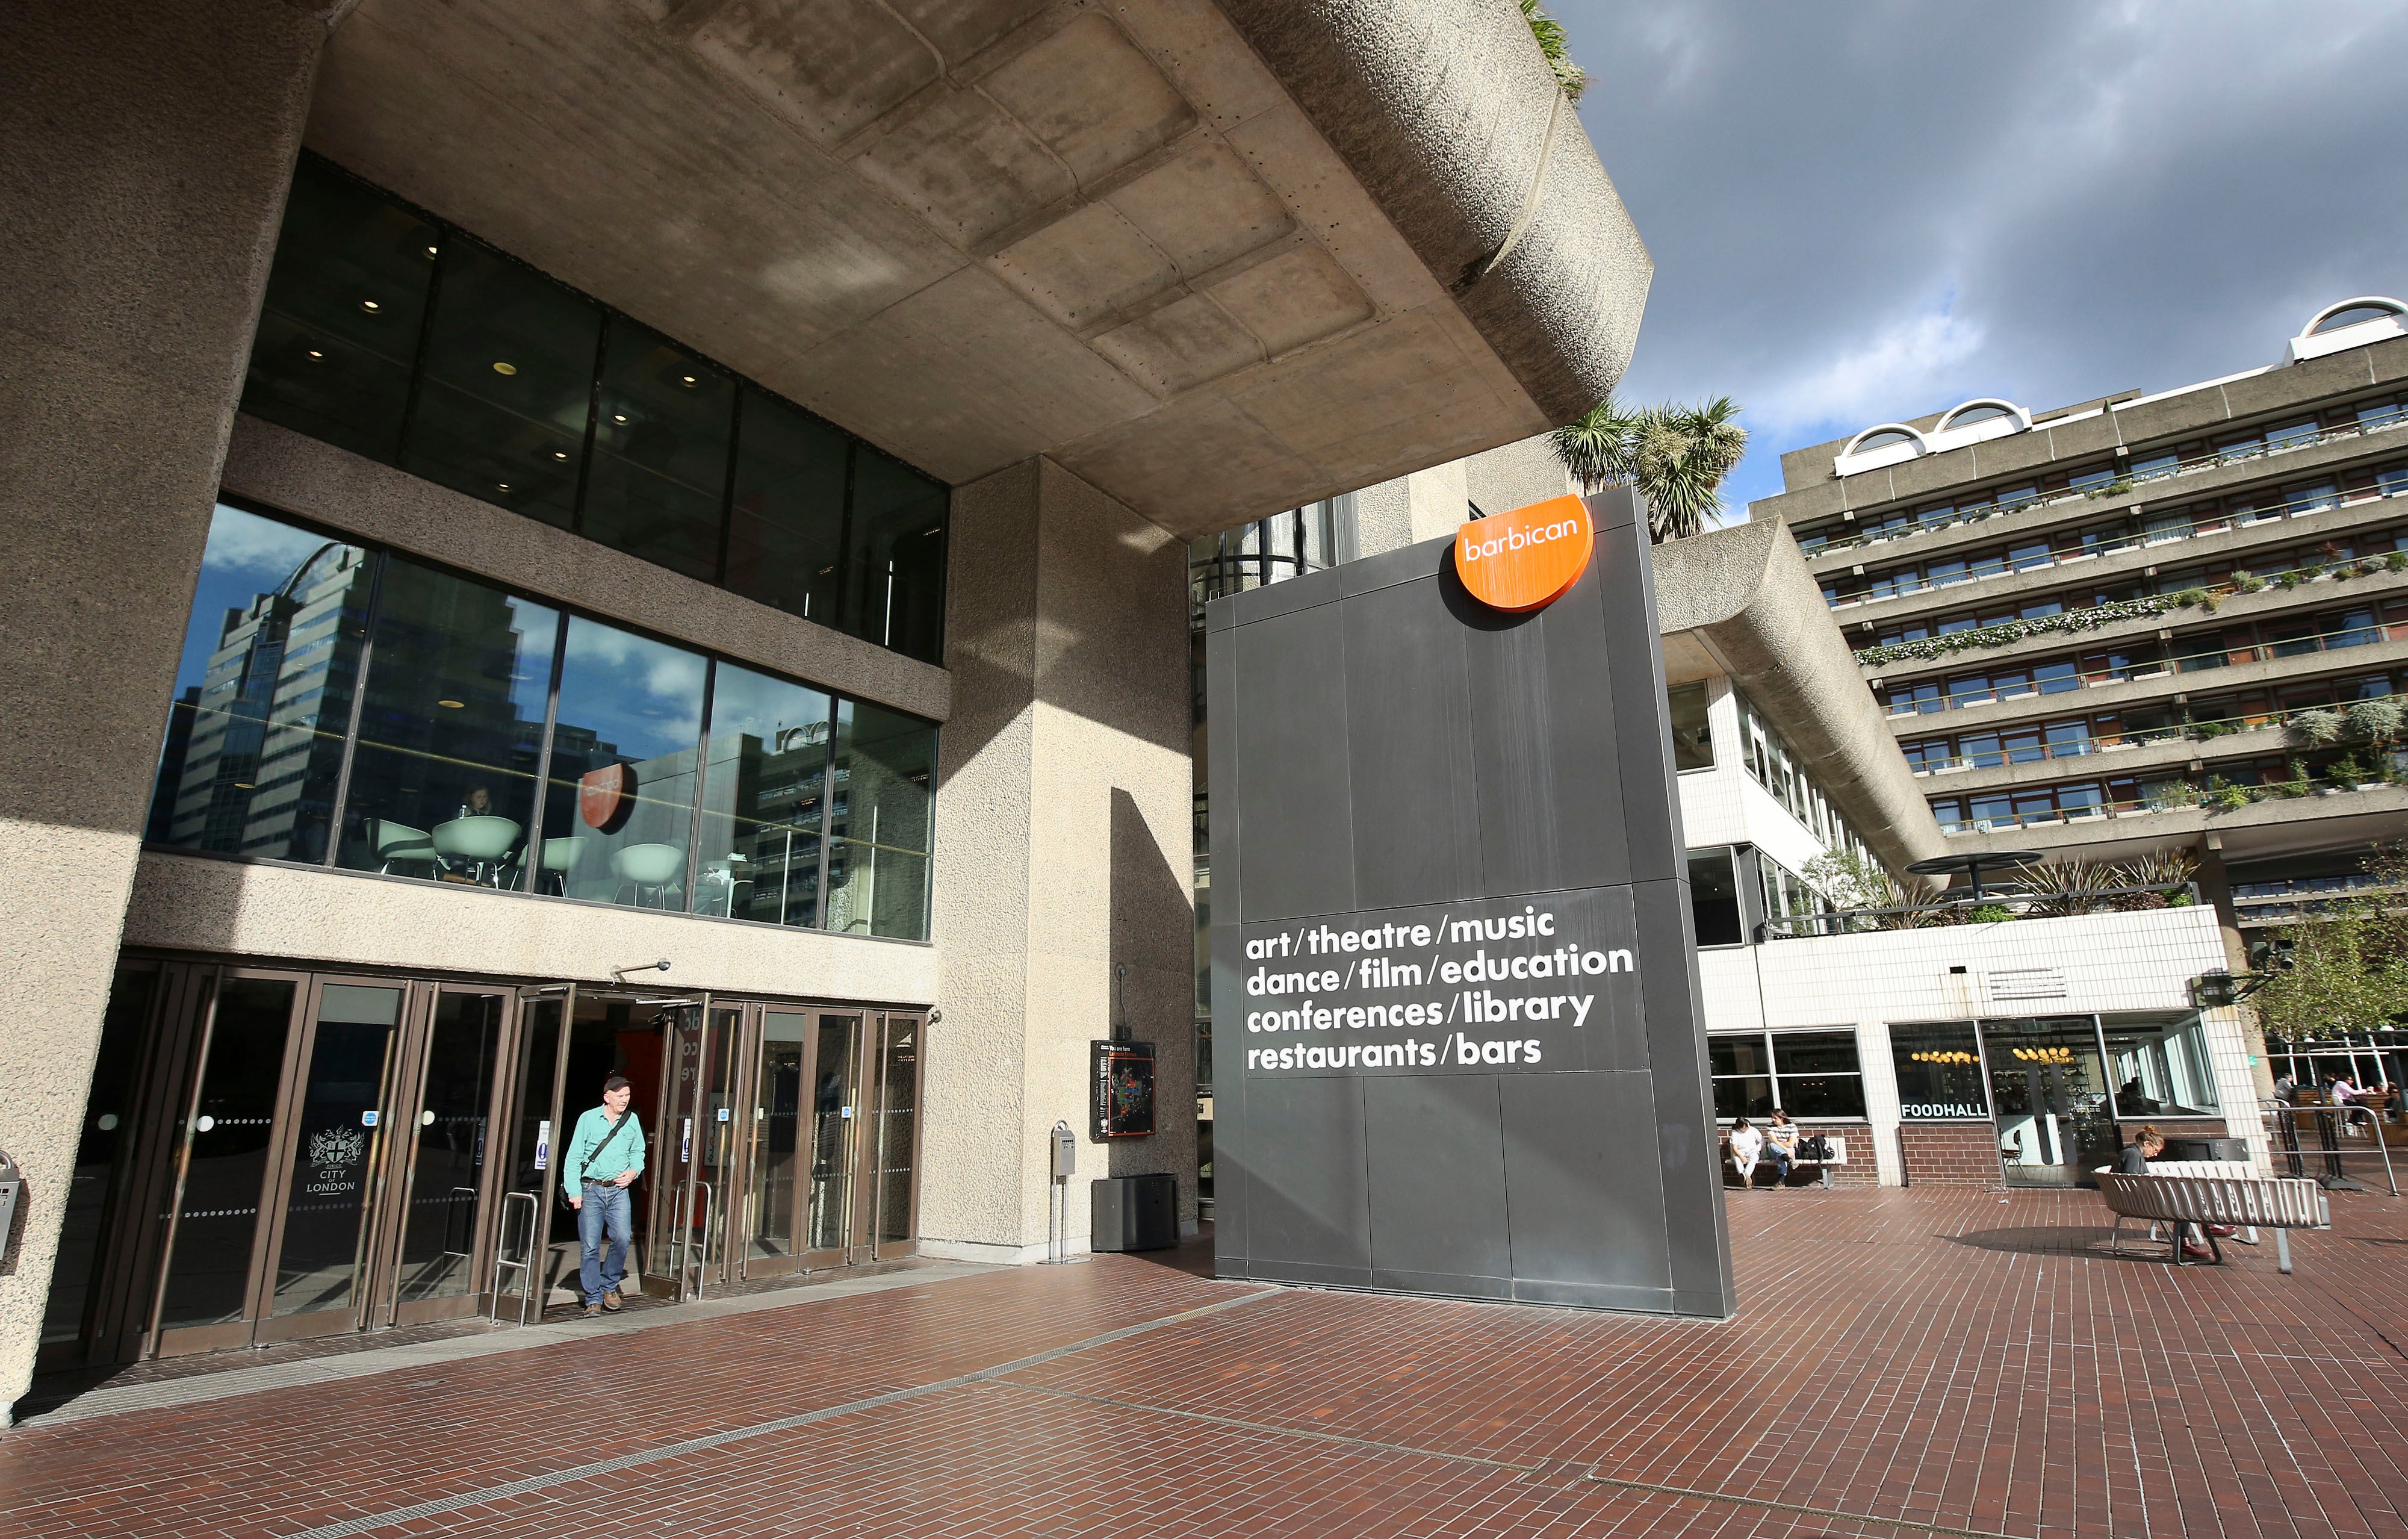 The London Starts Here campaign seeks to raise awareness of The Barbican Quarter as an area of international and historic significance (Philip Toscano/PA)